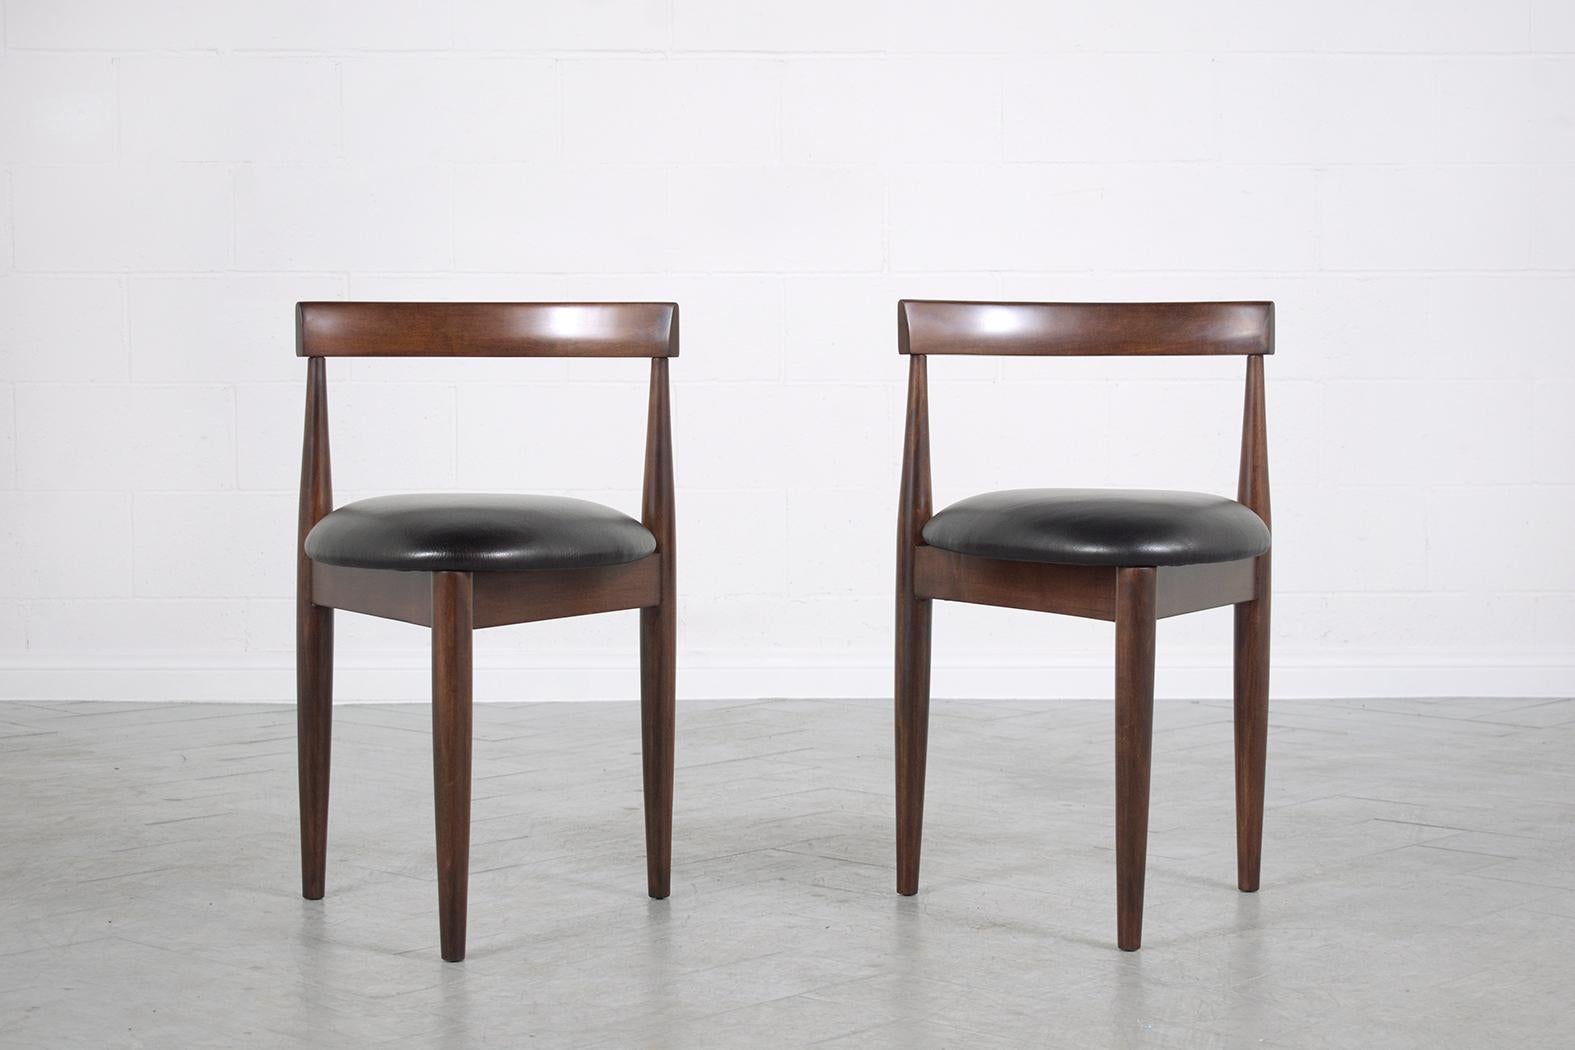 Carved Vintage Set of Three Mid-Century Modern Dining Chairs